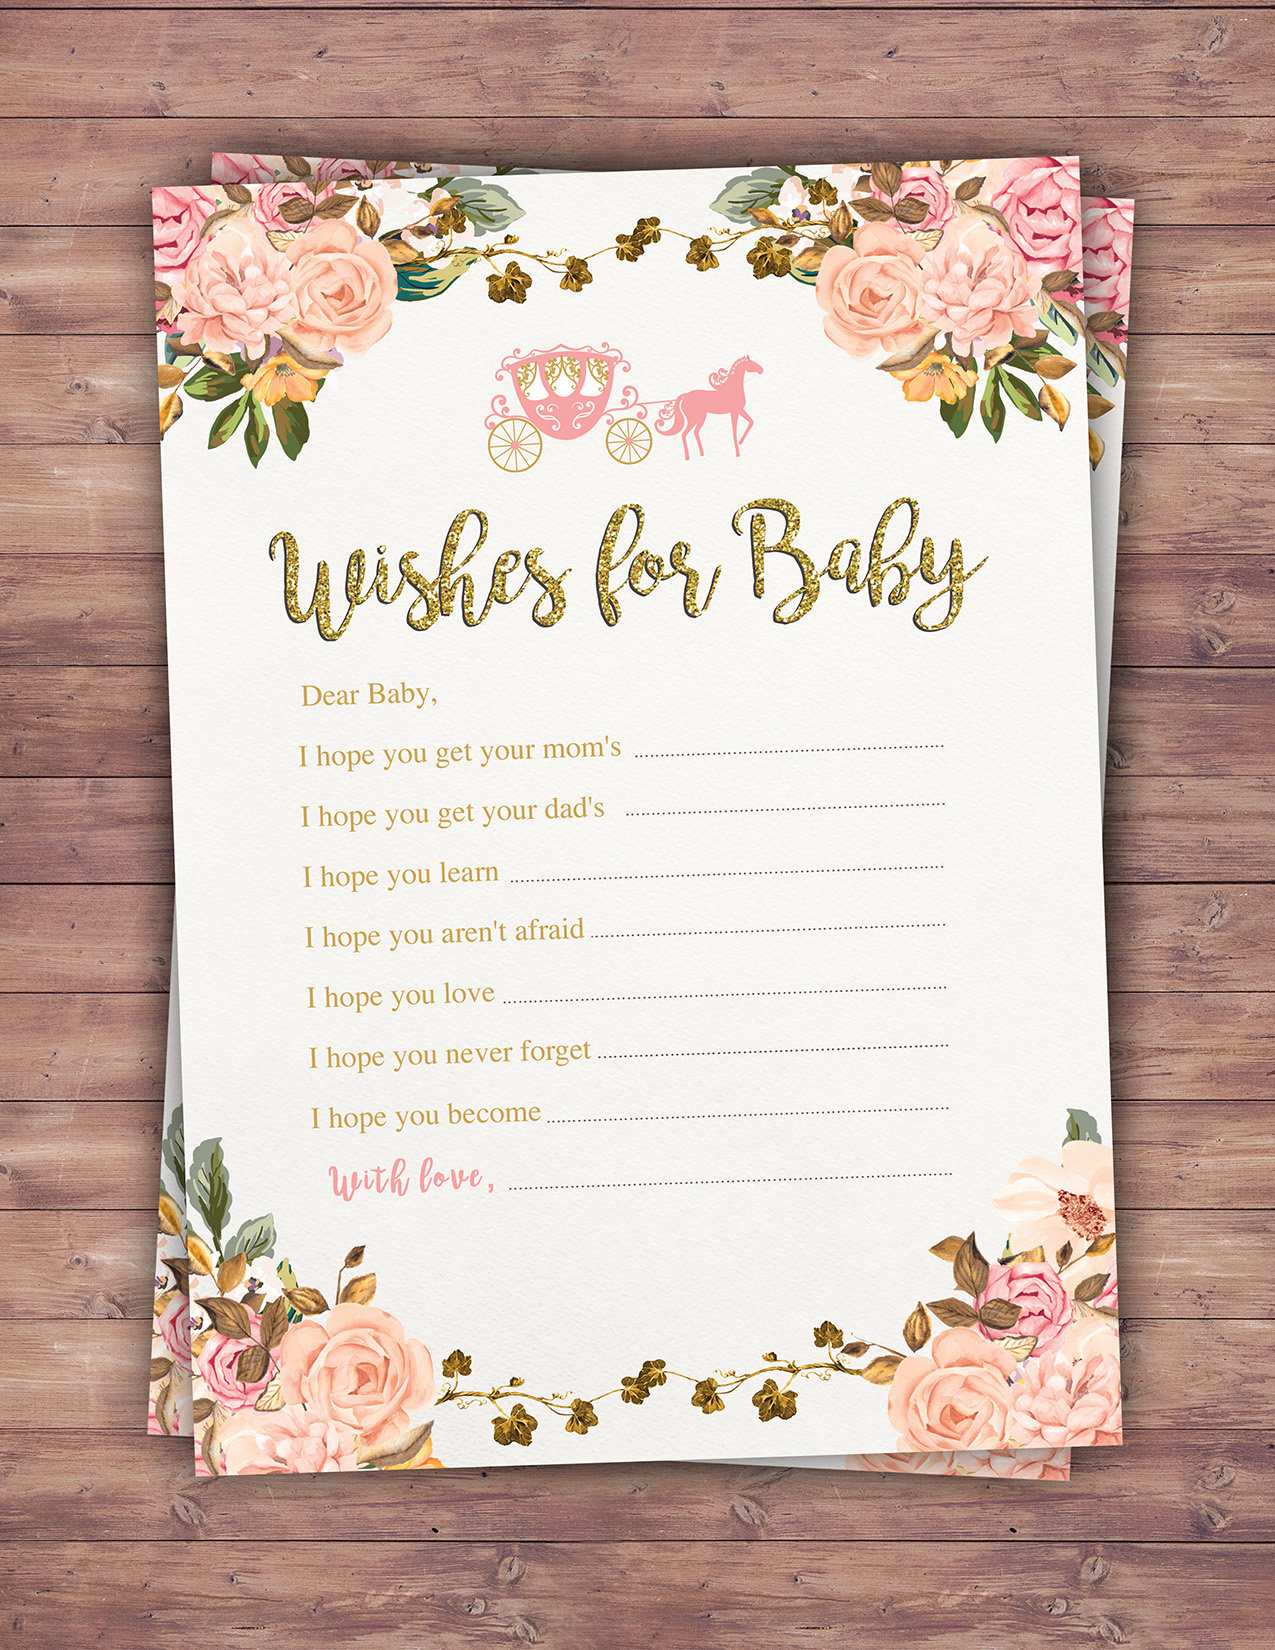 Full Size of Baby Shower:stylish Baby Shower Wishes Picture Inspirations Baby Shower Wishes Personalized Baby Shower Baby Shower Ideas For Boys Baby Shower Songs Baby Shower Fiesta Ideas Baby Shower Wishes Card Wishes For Baby Princess Baby Shower Pink Gold Glitter Princess Baby Shower Game